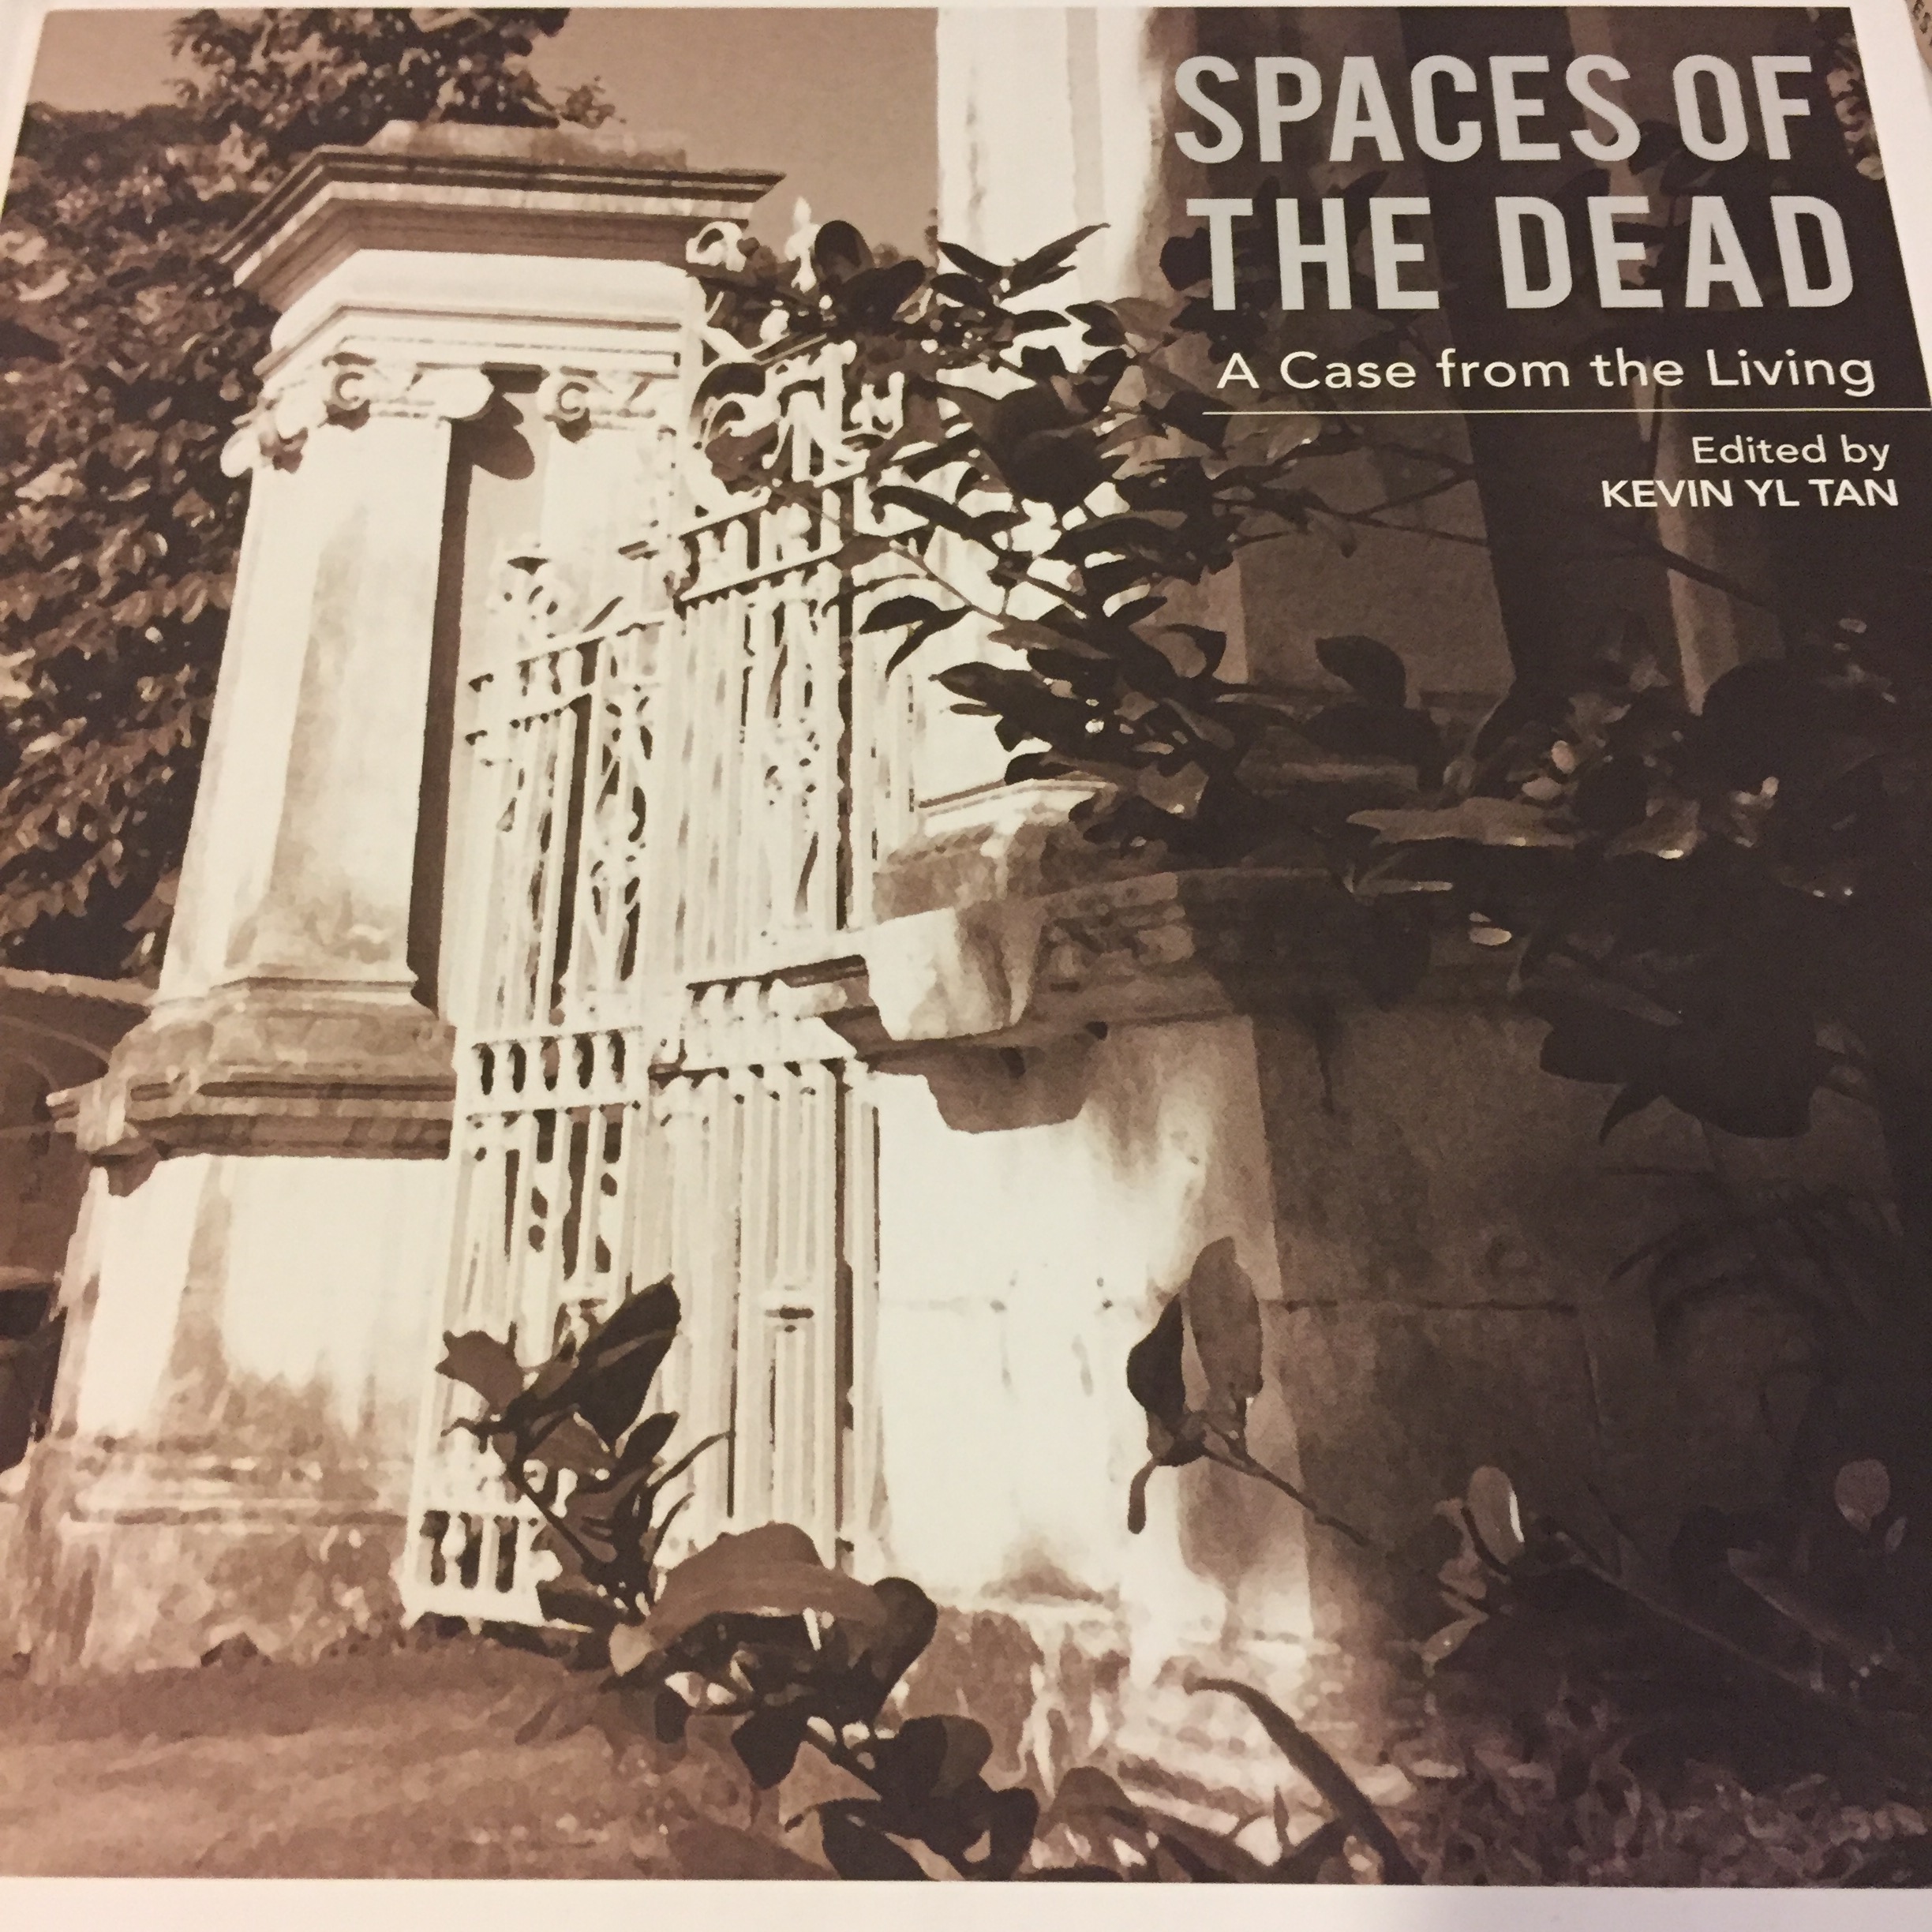 Spaces of the dead